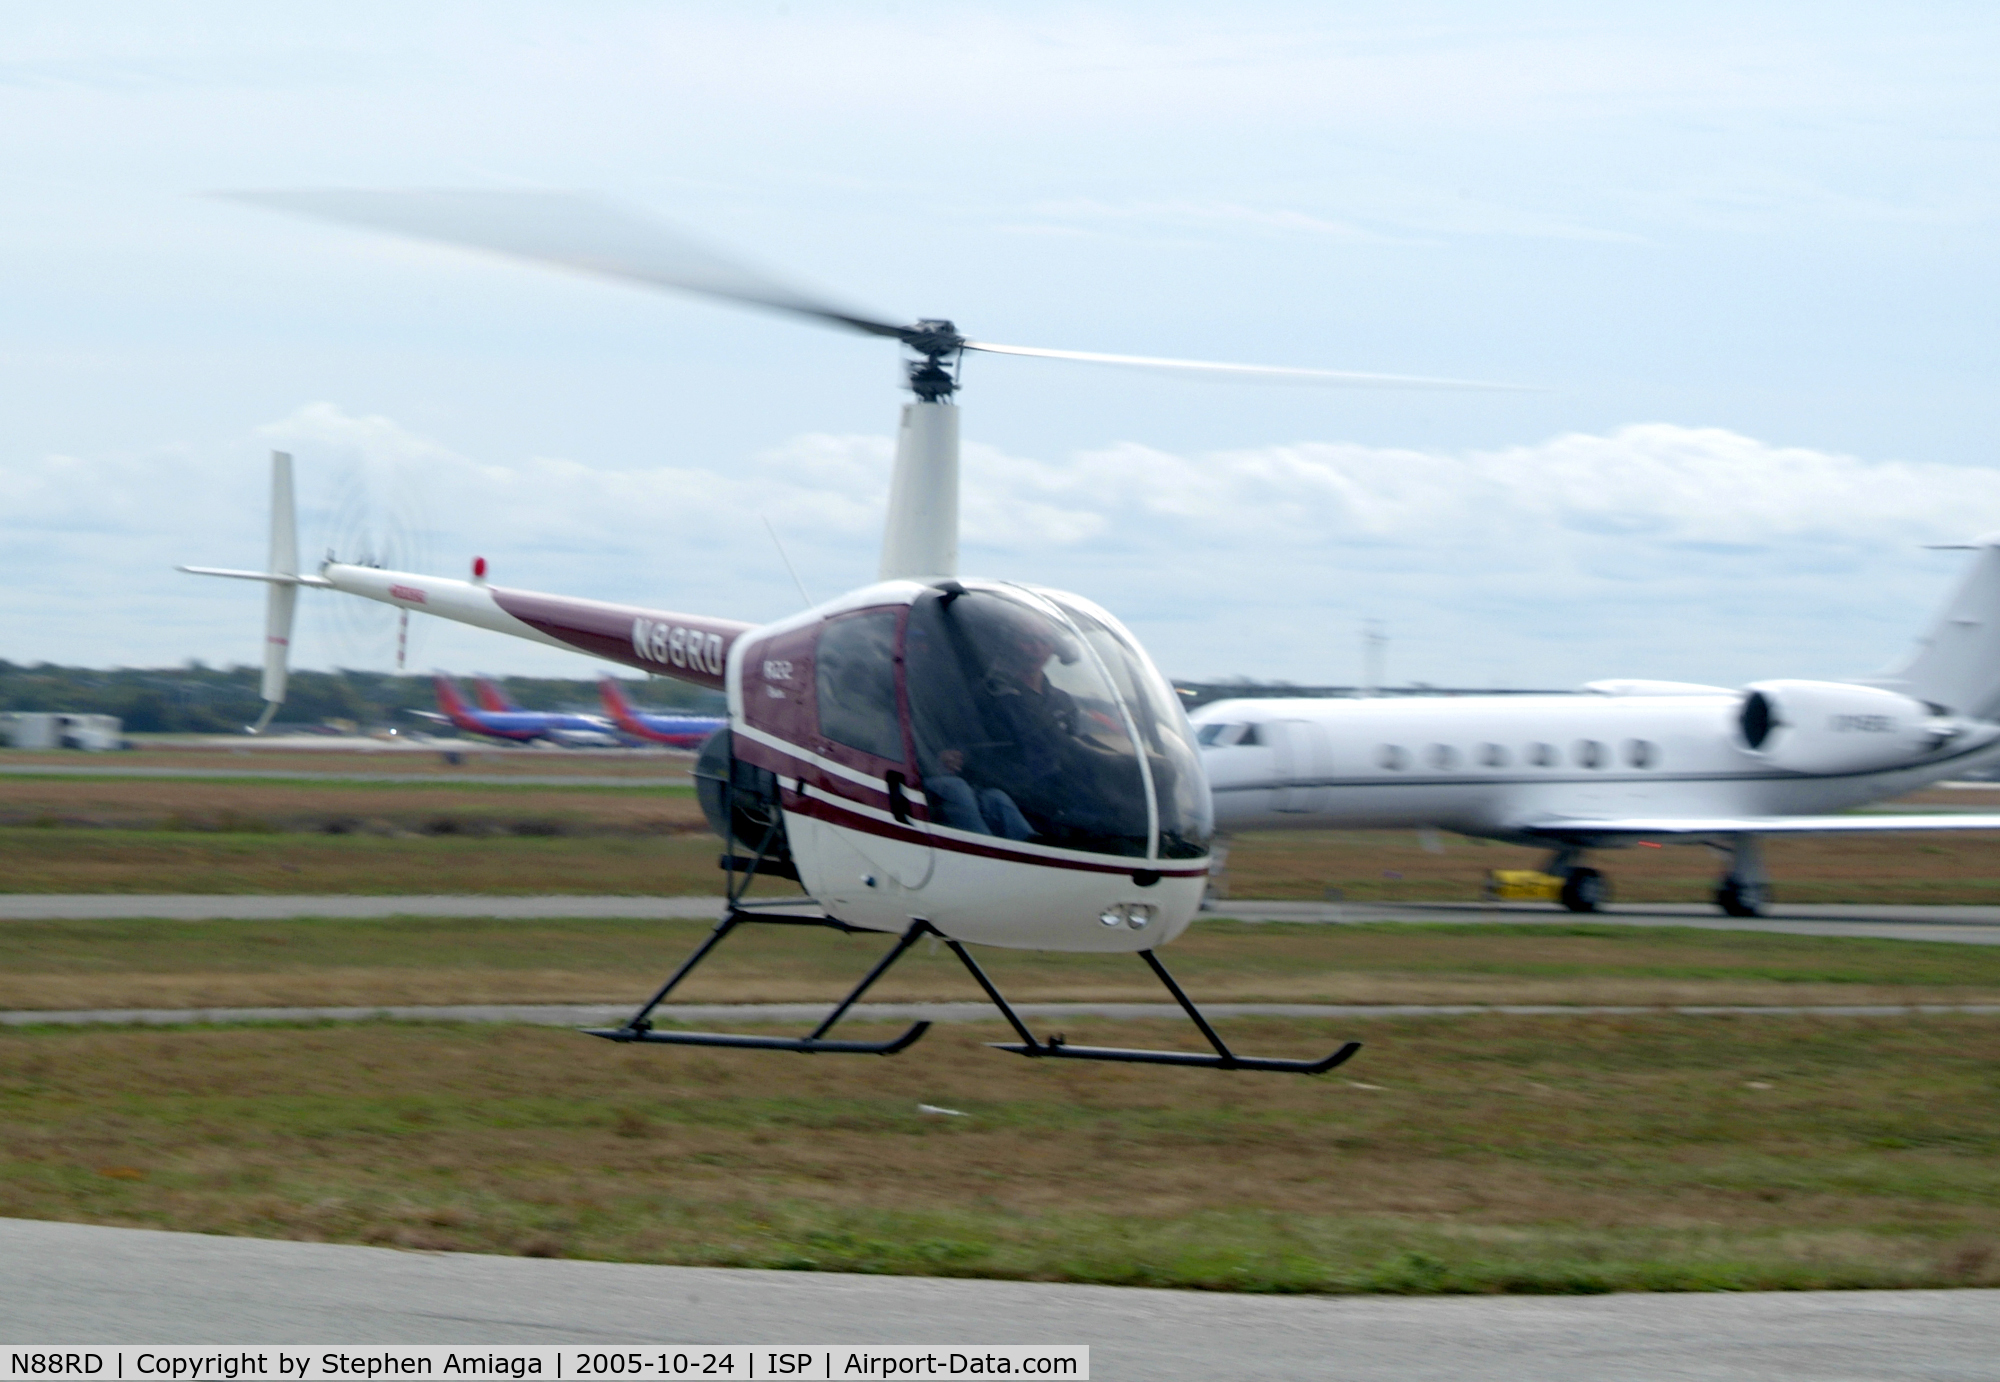 N88RD, 1992 Robinson R22 BETA C/N 2214, 88RD hover-taxiing from the Whiskey Pad with 745RS behind her.